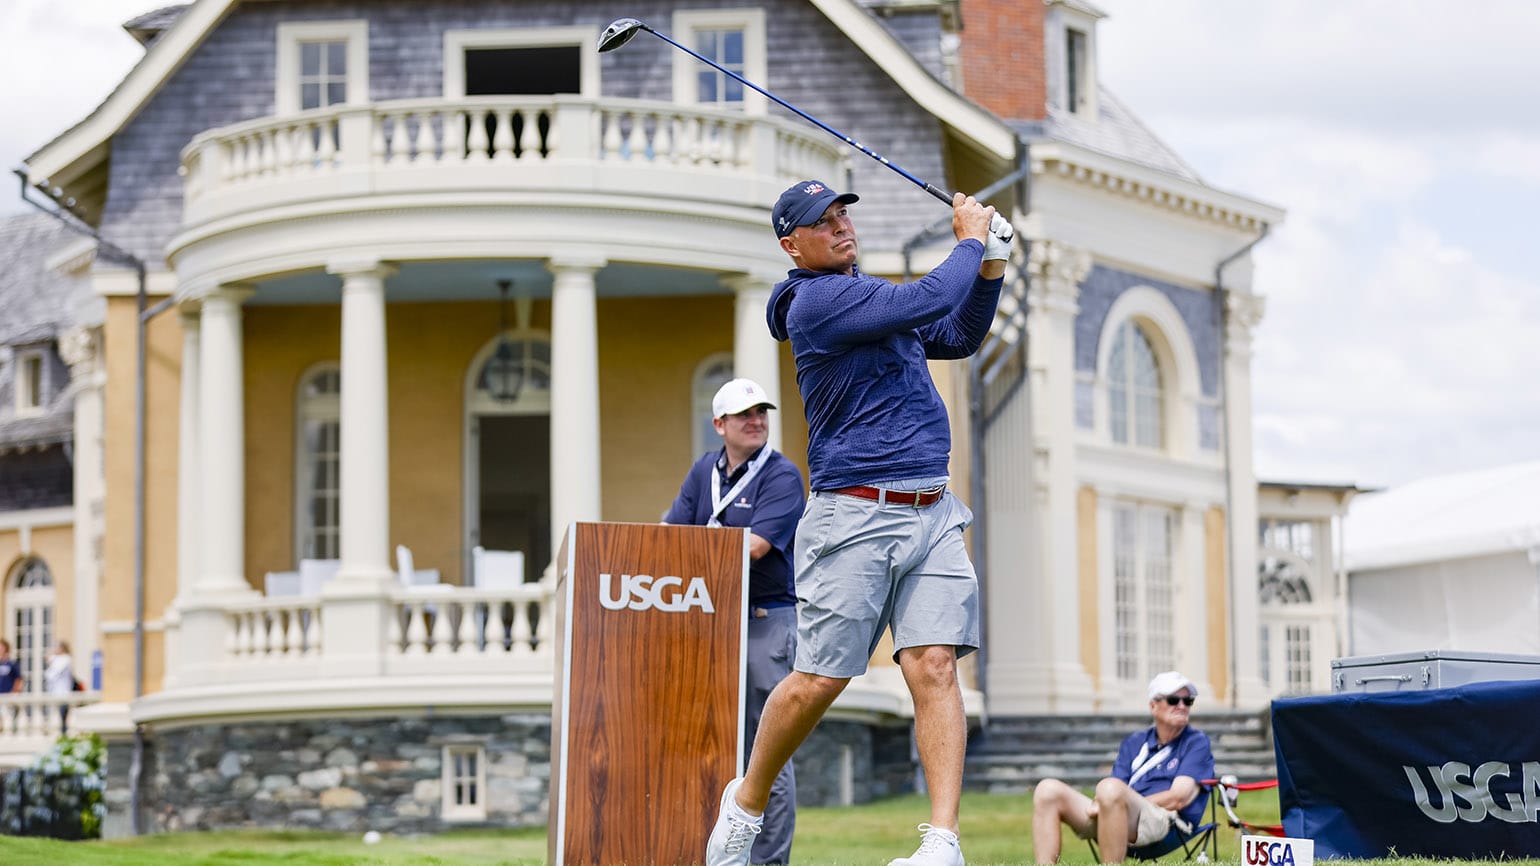 Trip Kuehne and his family of USGA golf champions have a fondness for the rich history at Newport C.C., where he had an earlier-than-expected exit from match play in the 1995 U.S. Amateur. (USGA/Jonathan Ernst)